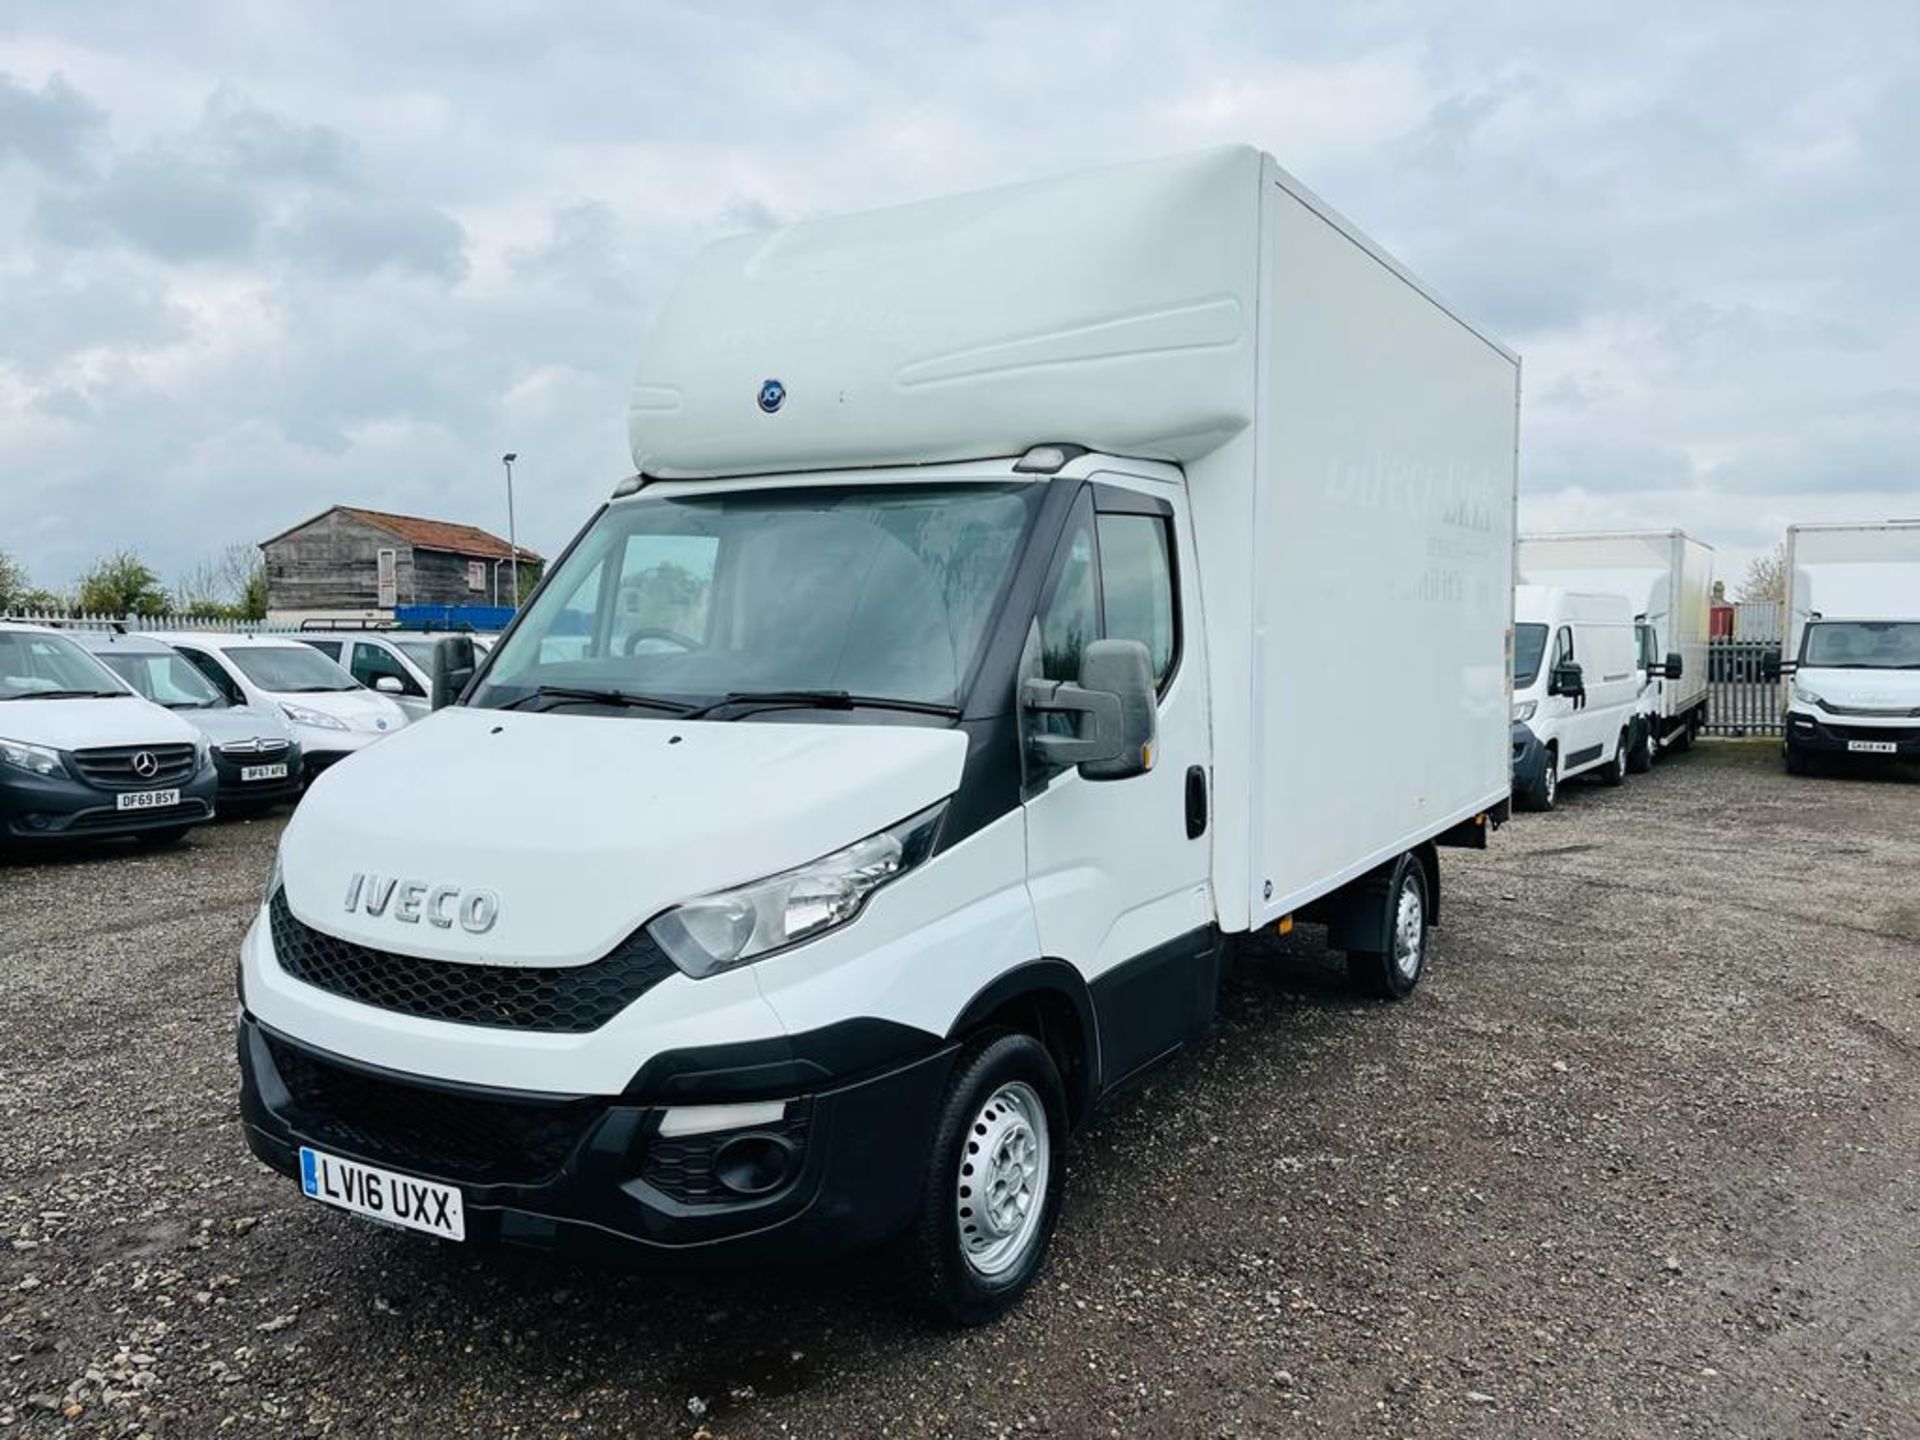 ** ON SALE ** Iveco Daily 35S13 2.3 HD 125 Luton Tail Lift 2016 '16 Reg' - Image 3 of 22